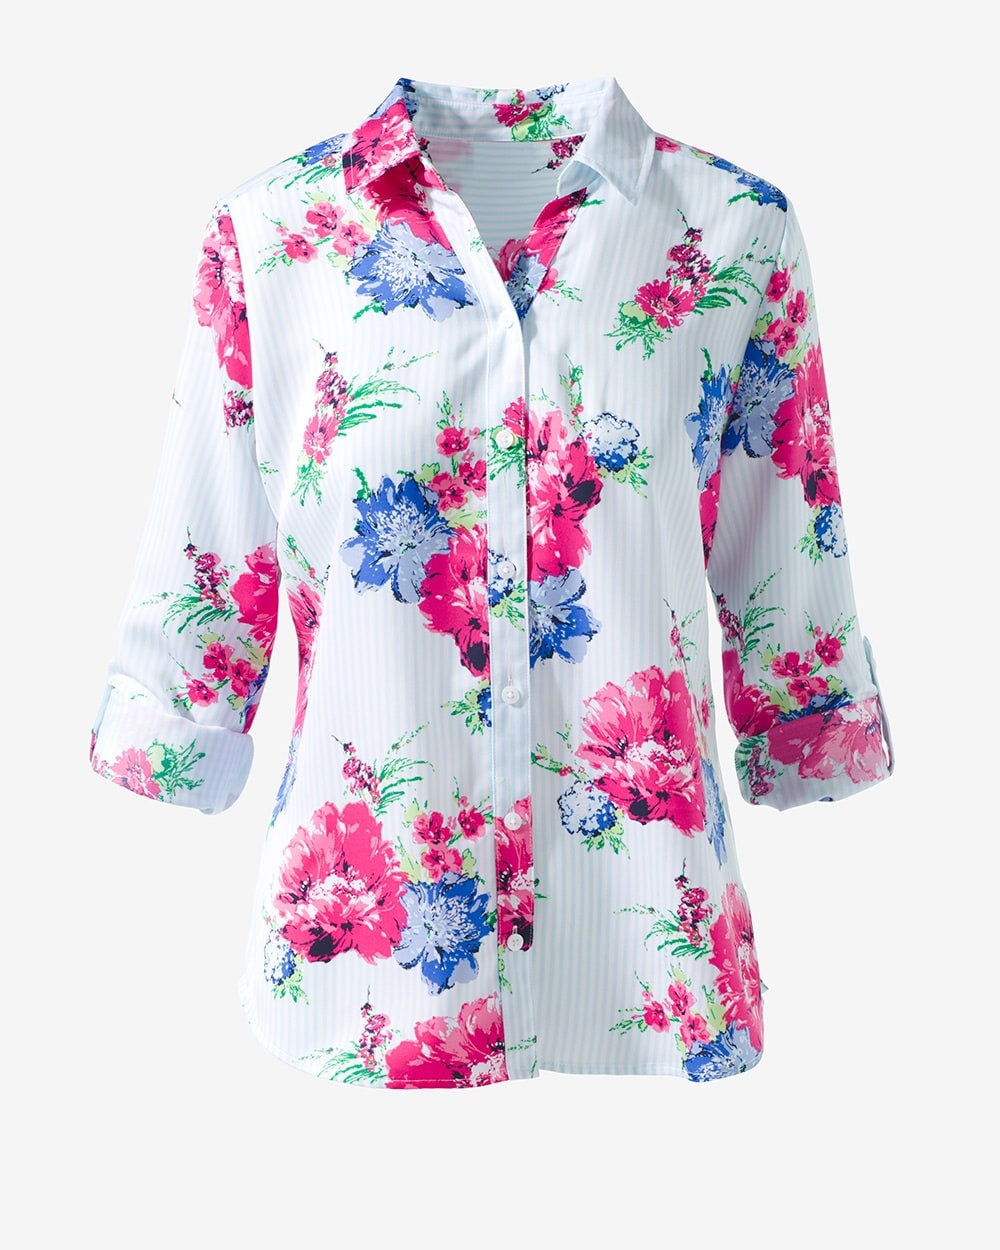 Blooming Frenzy Shirt